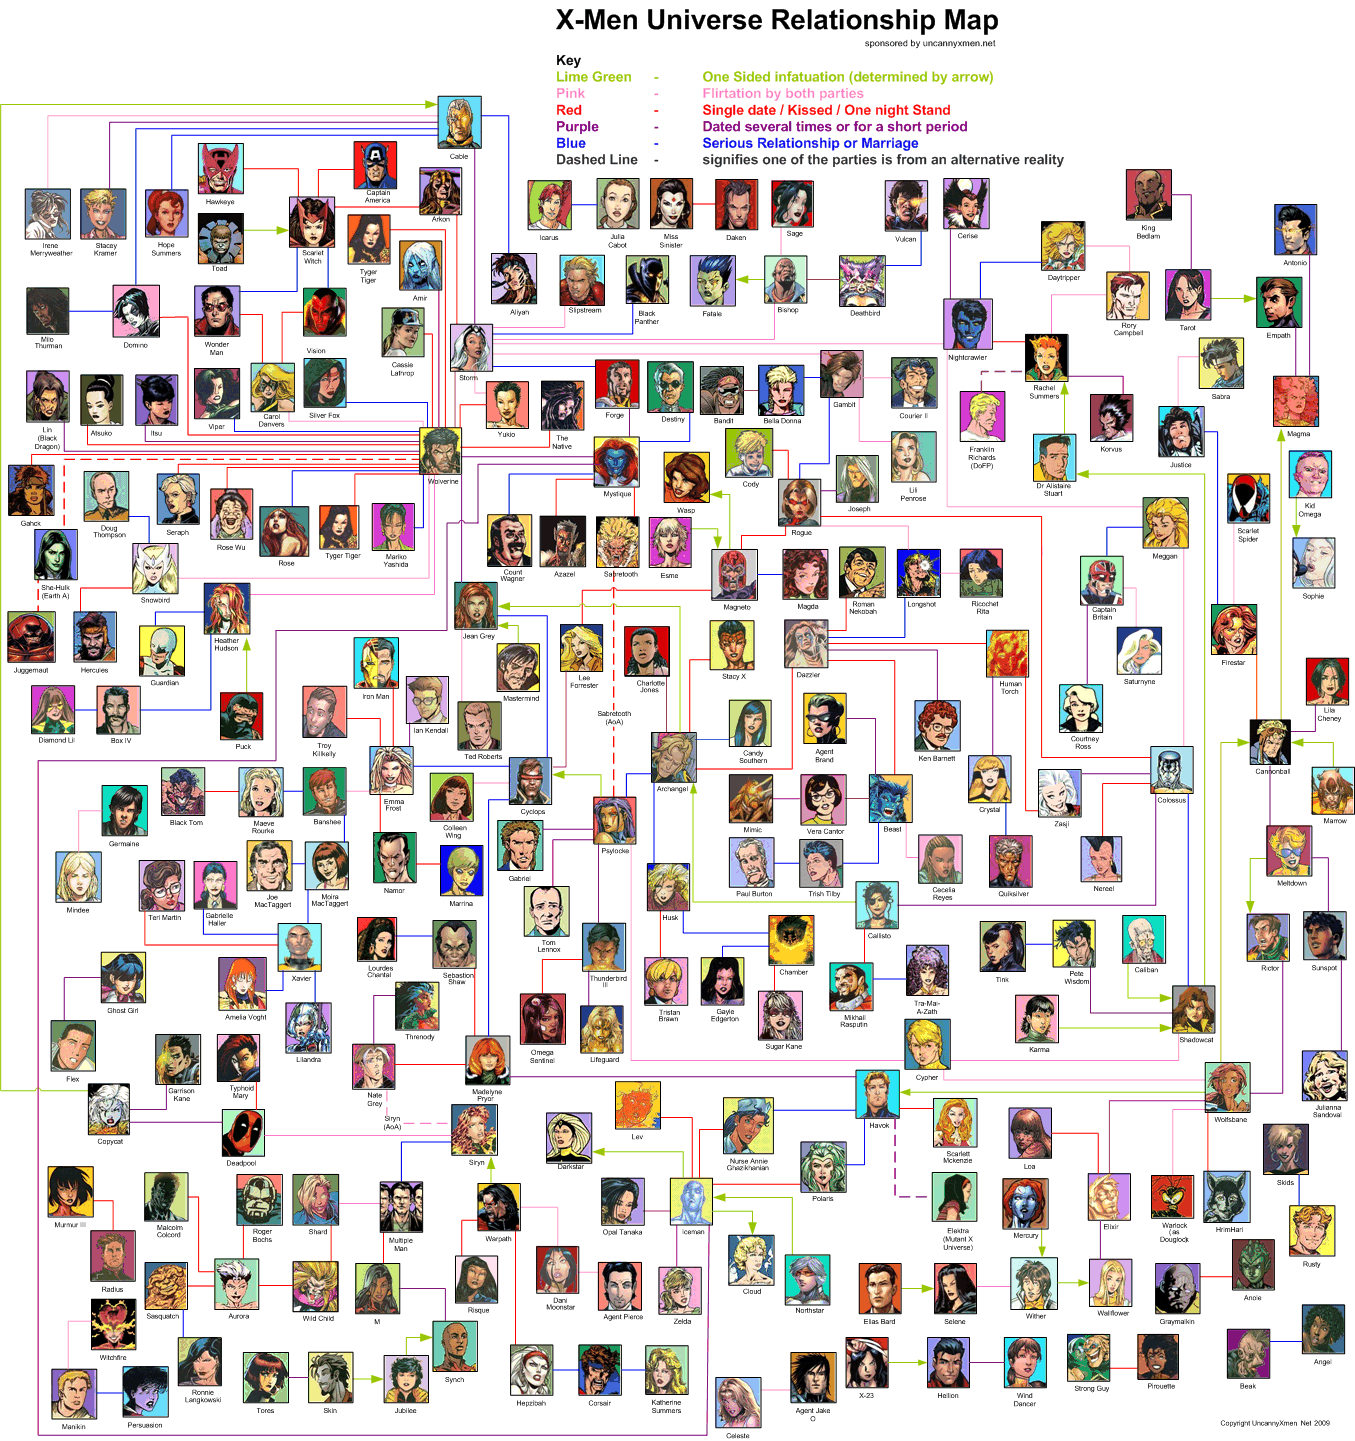 I know, it looks like a really badass flowchart, but it's not, it's a relationship map for all the characters in the X-Men universe.